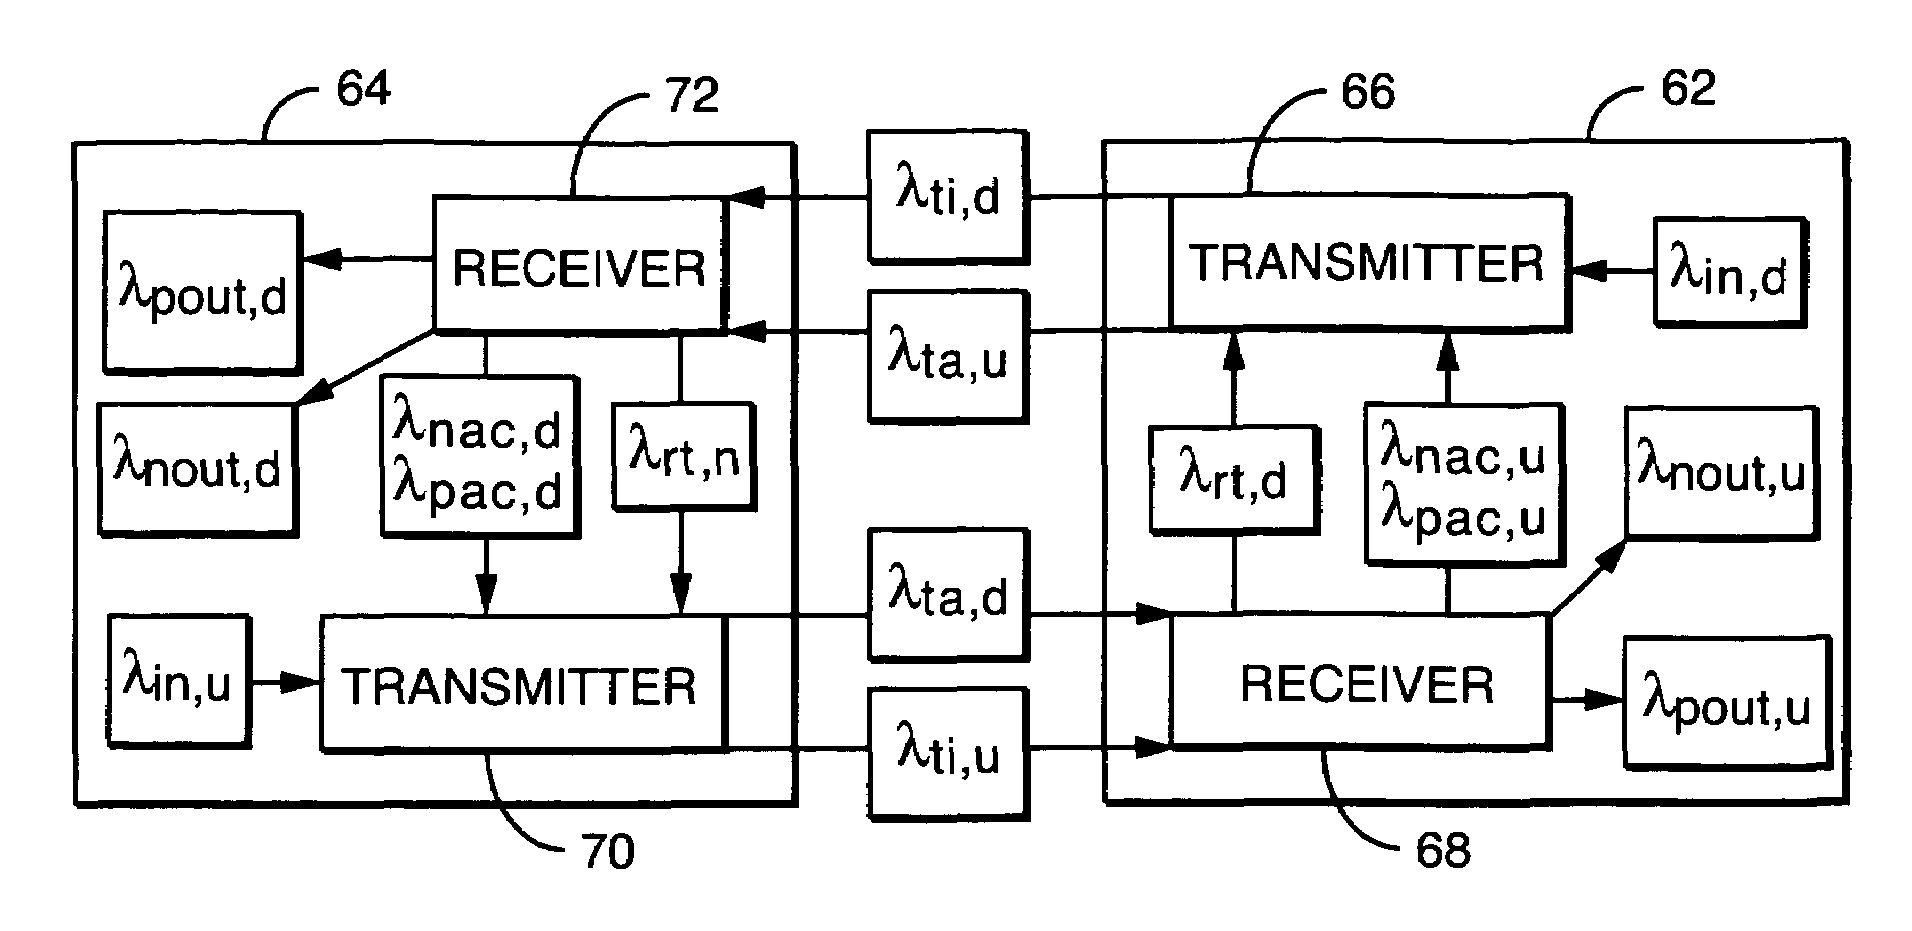 Performance evaluation of multicarrier channels with forward error correction and automatic retransmission request